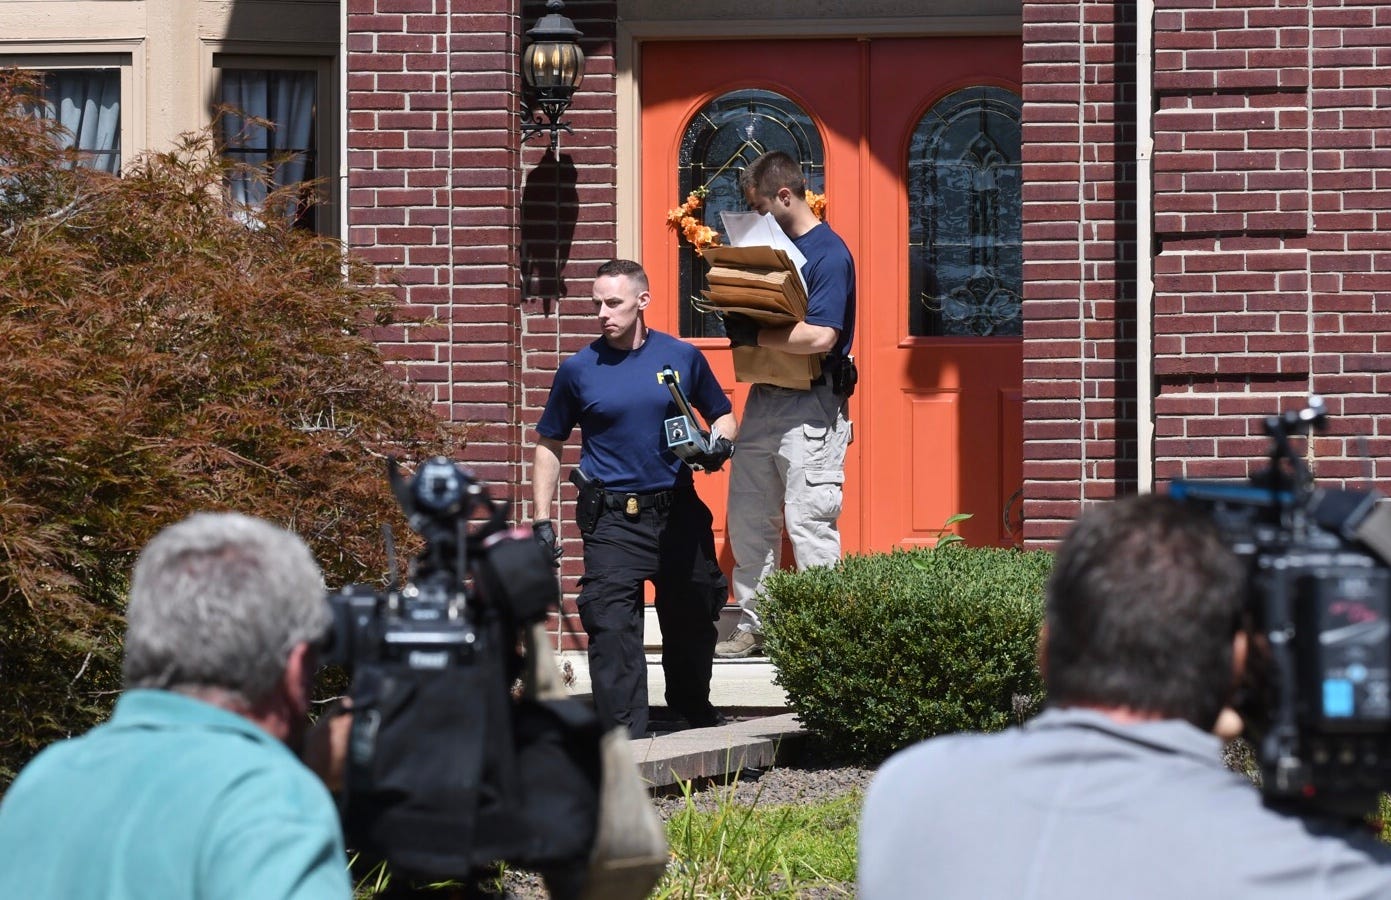 FBI investigators leave the home of UAW President Gary Jones after a search on Wednesday, August 28, 2019 in Canton Township.